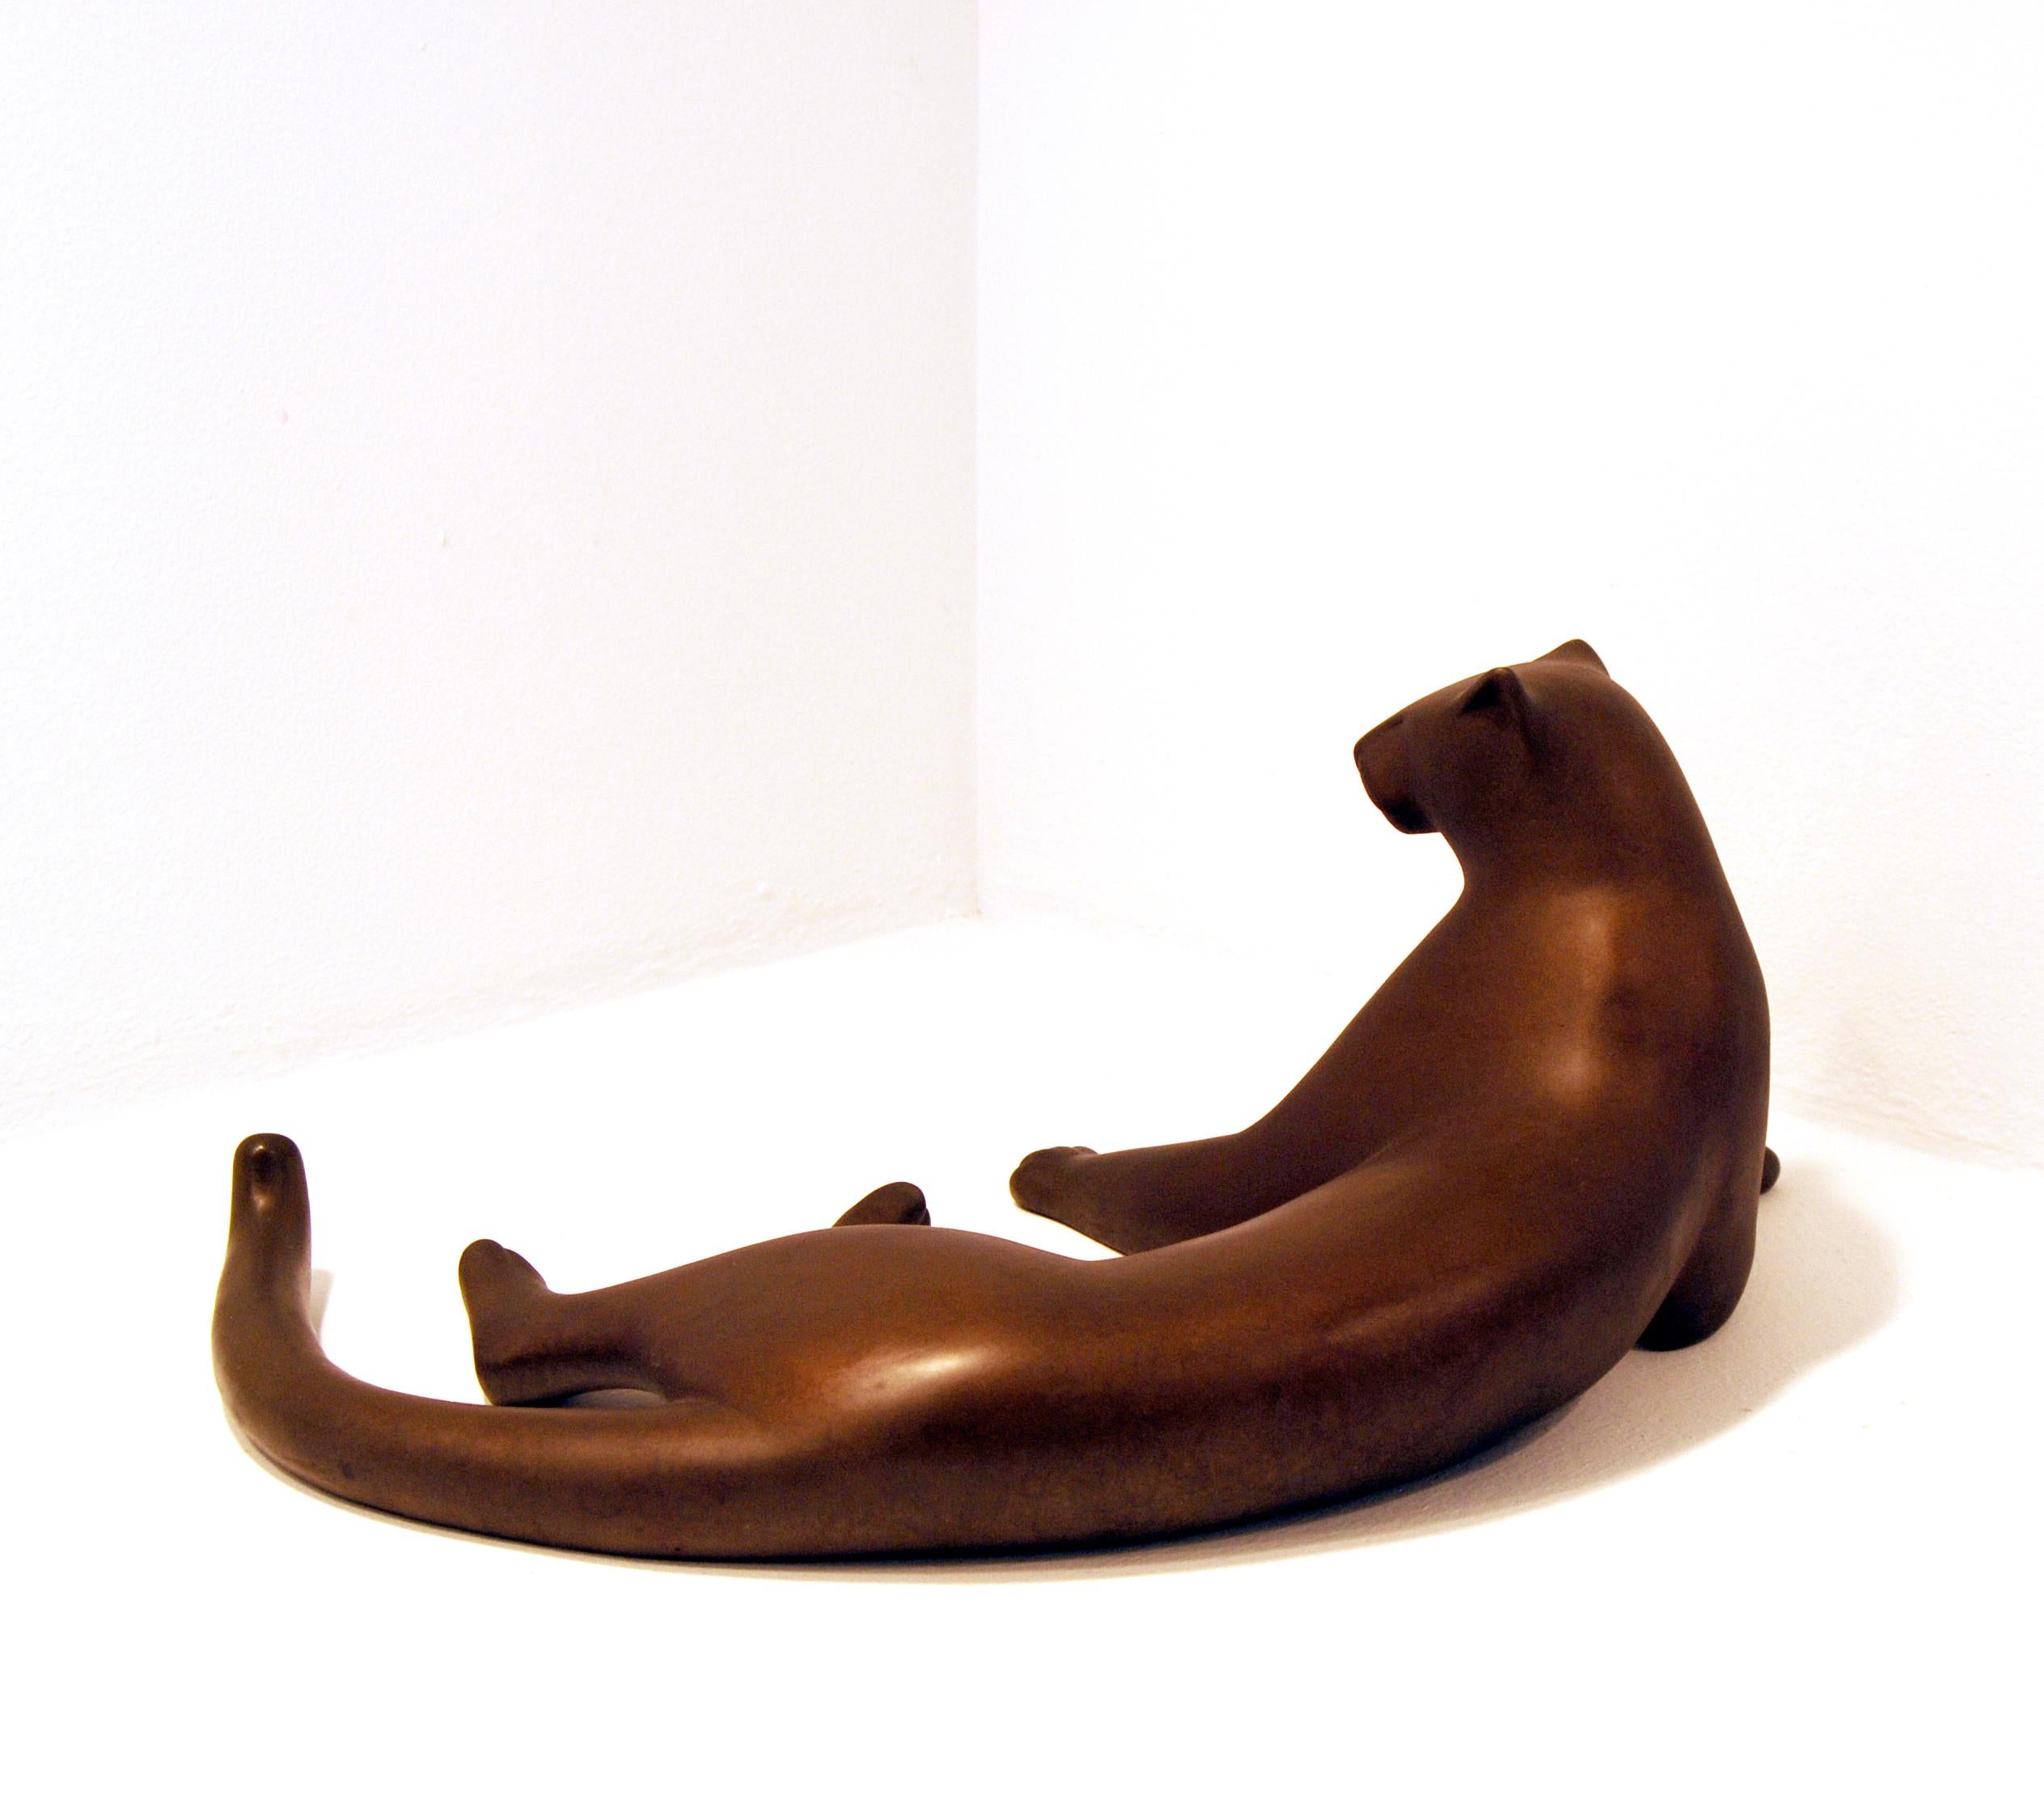 Lying Panther Maquette - Contemporary Sculpture by Gwynn Murrill